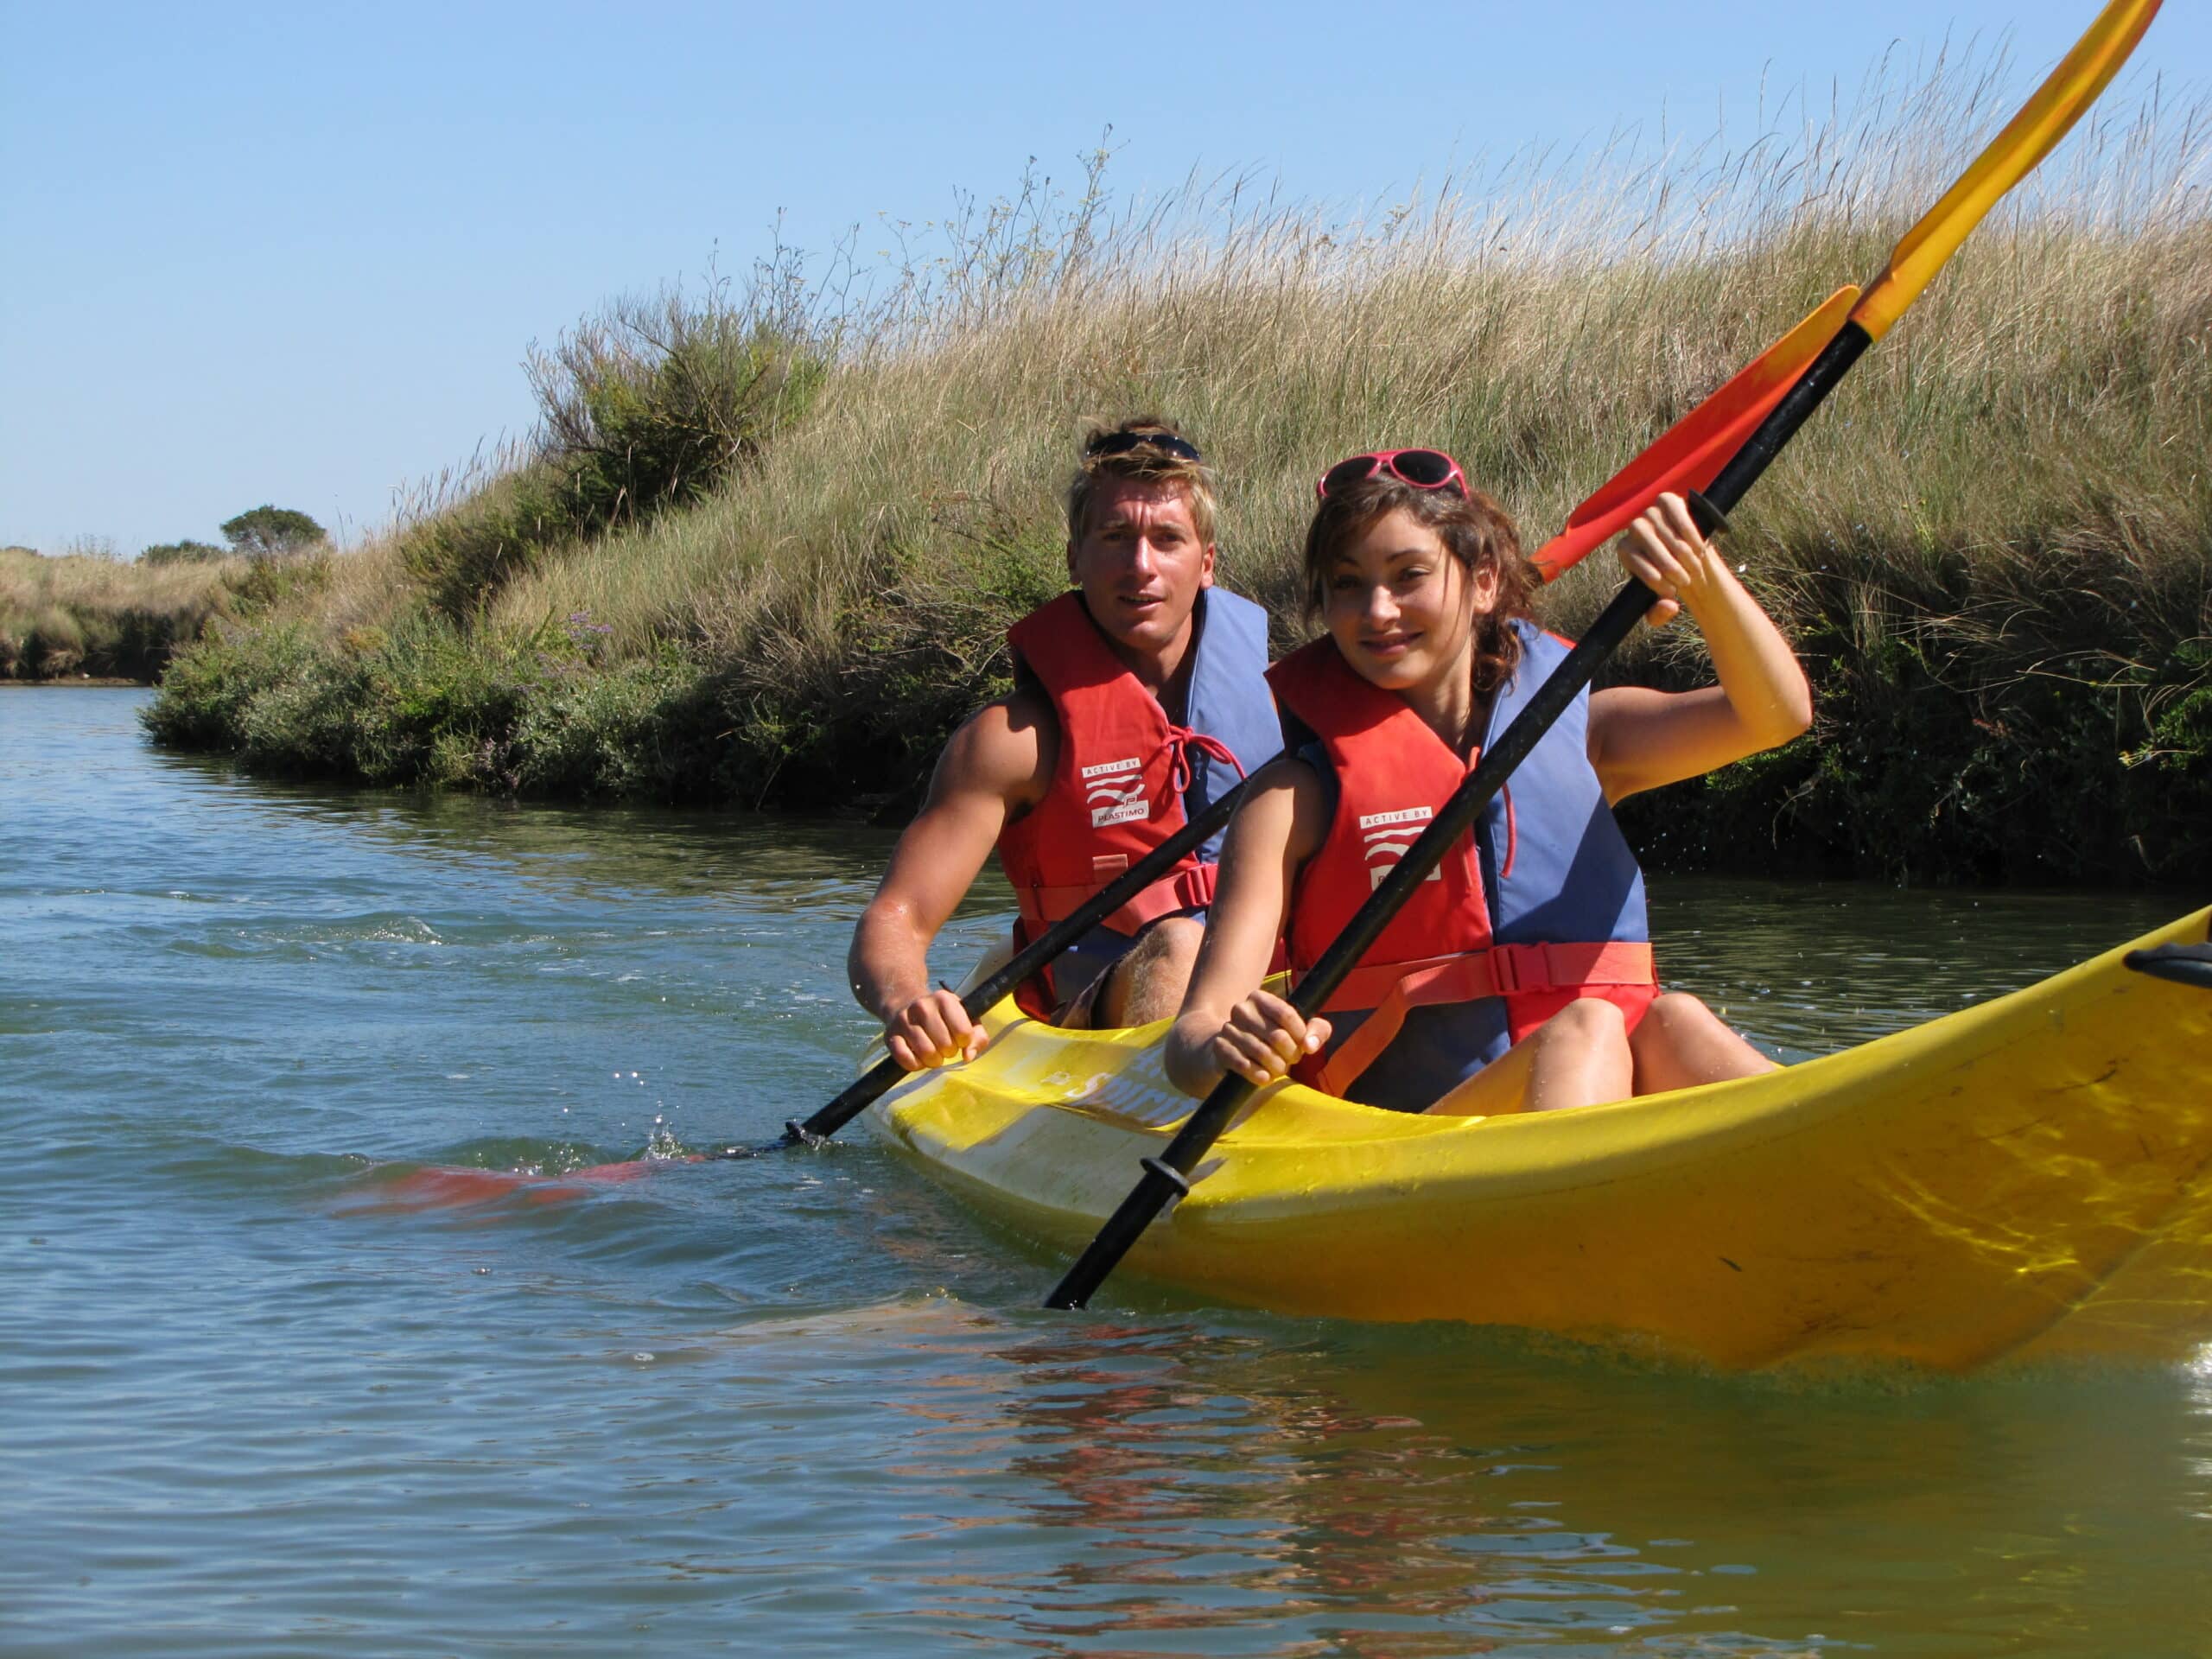 Best family activity in Vendee